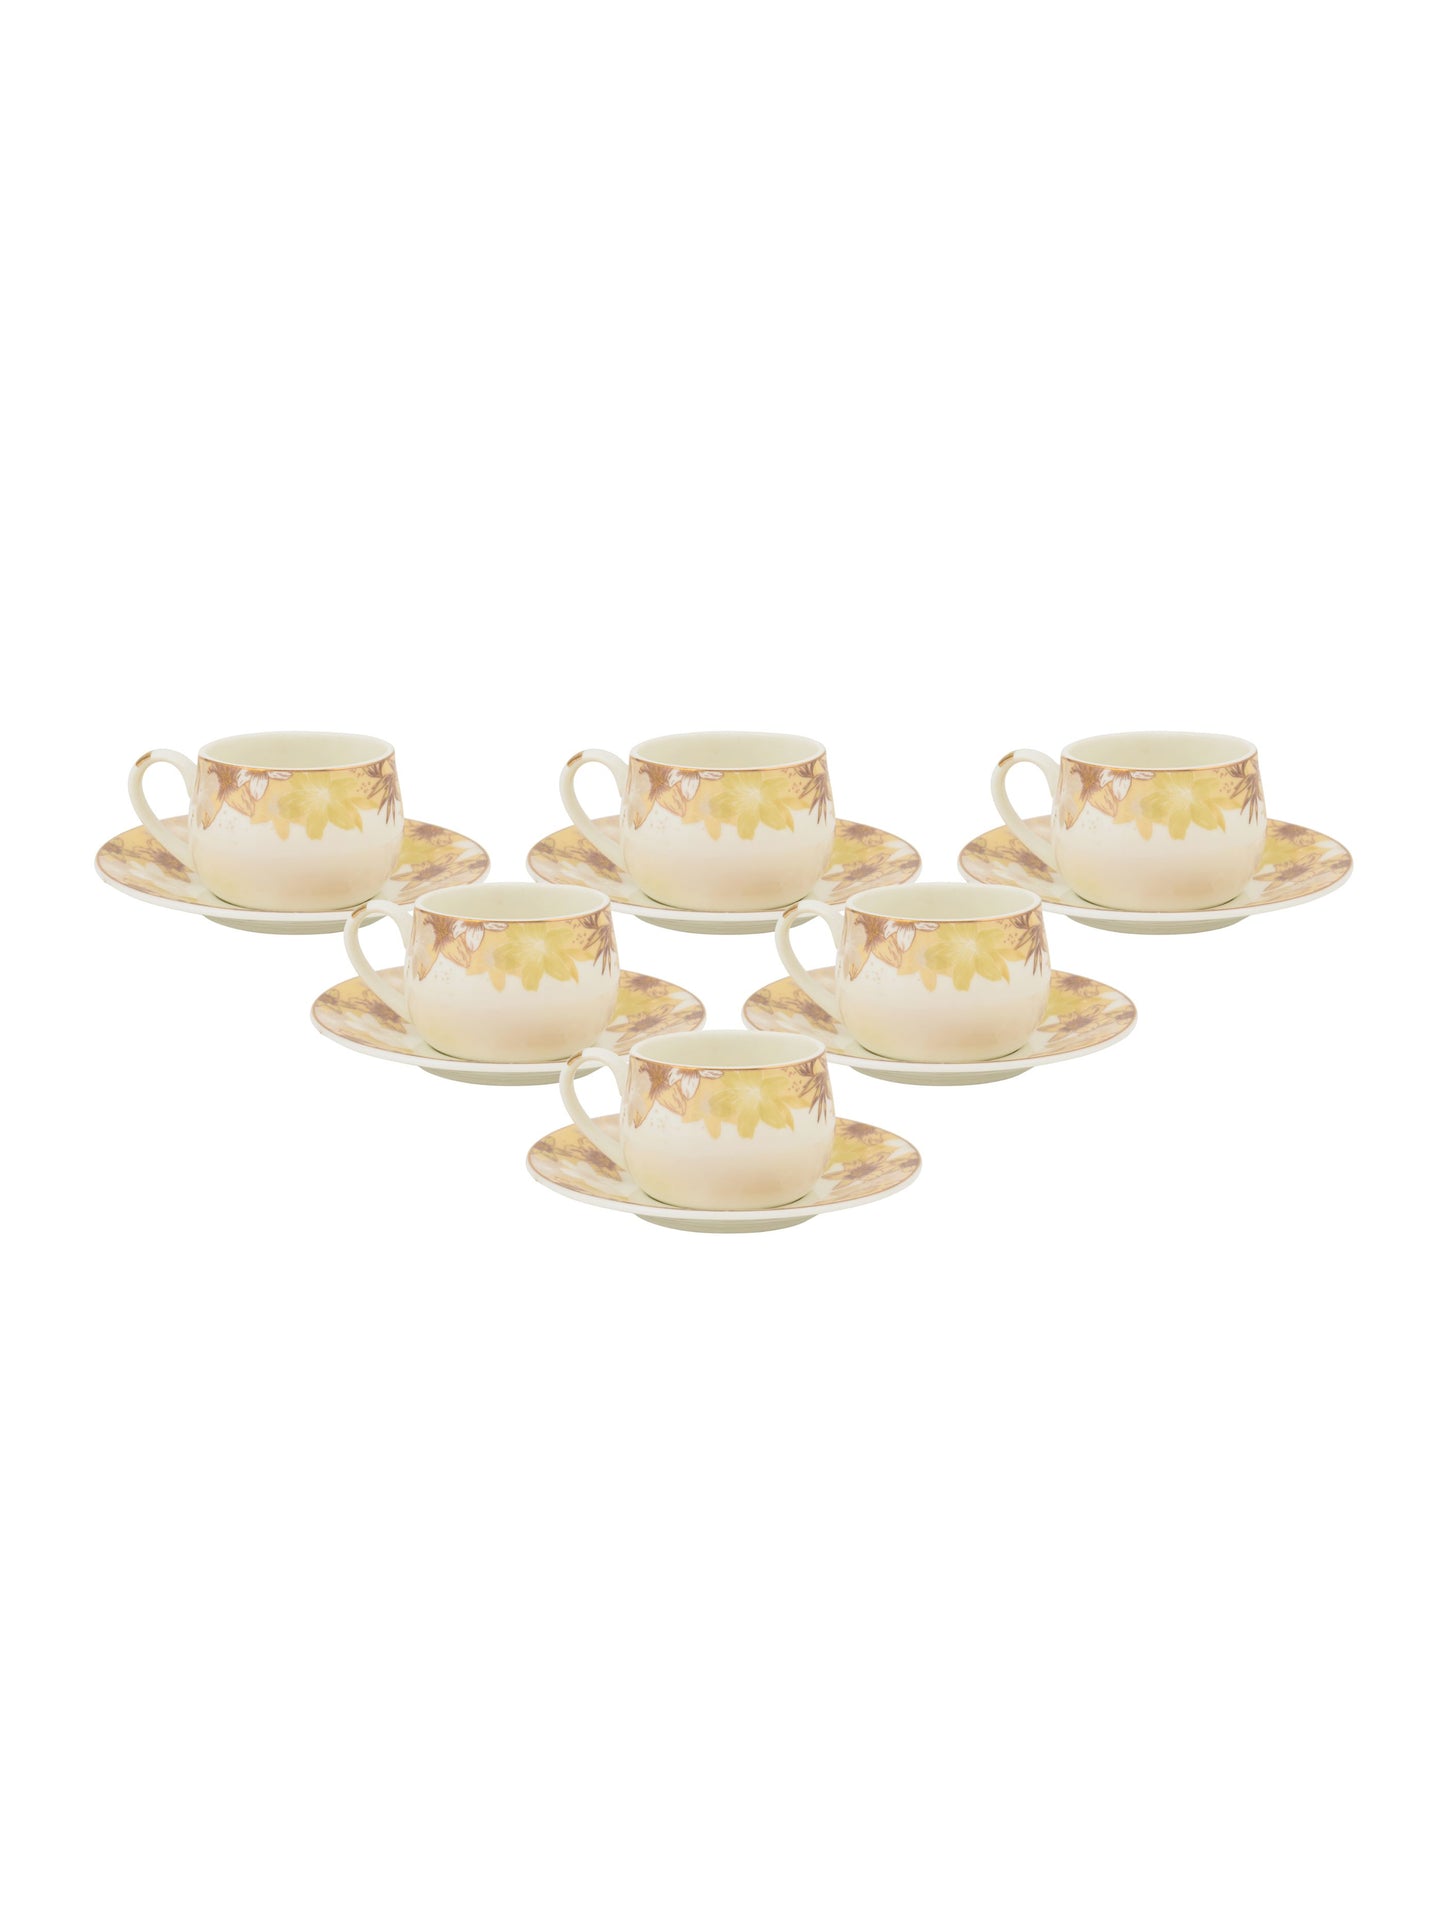 JCPL Coral Aroma Cup & Saucer, 145ml, Set of 12 (6 Cups + 6 Saucers) (AS4)